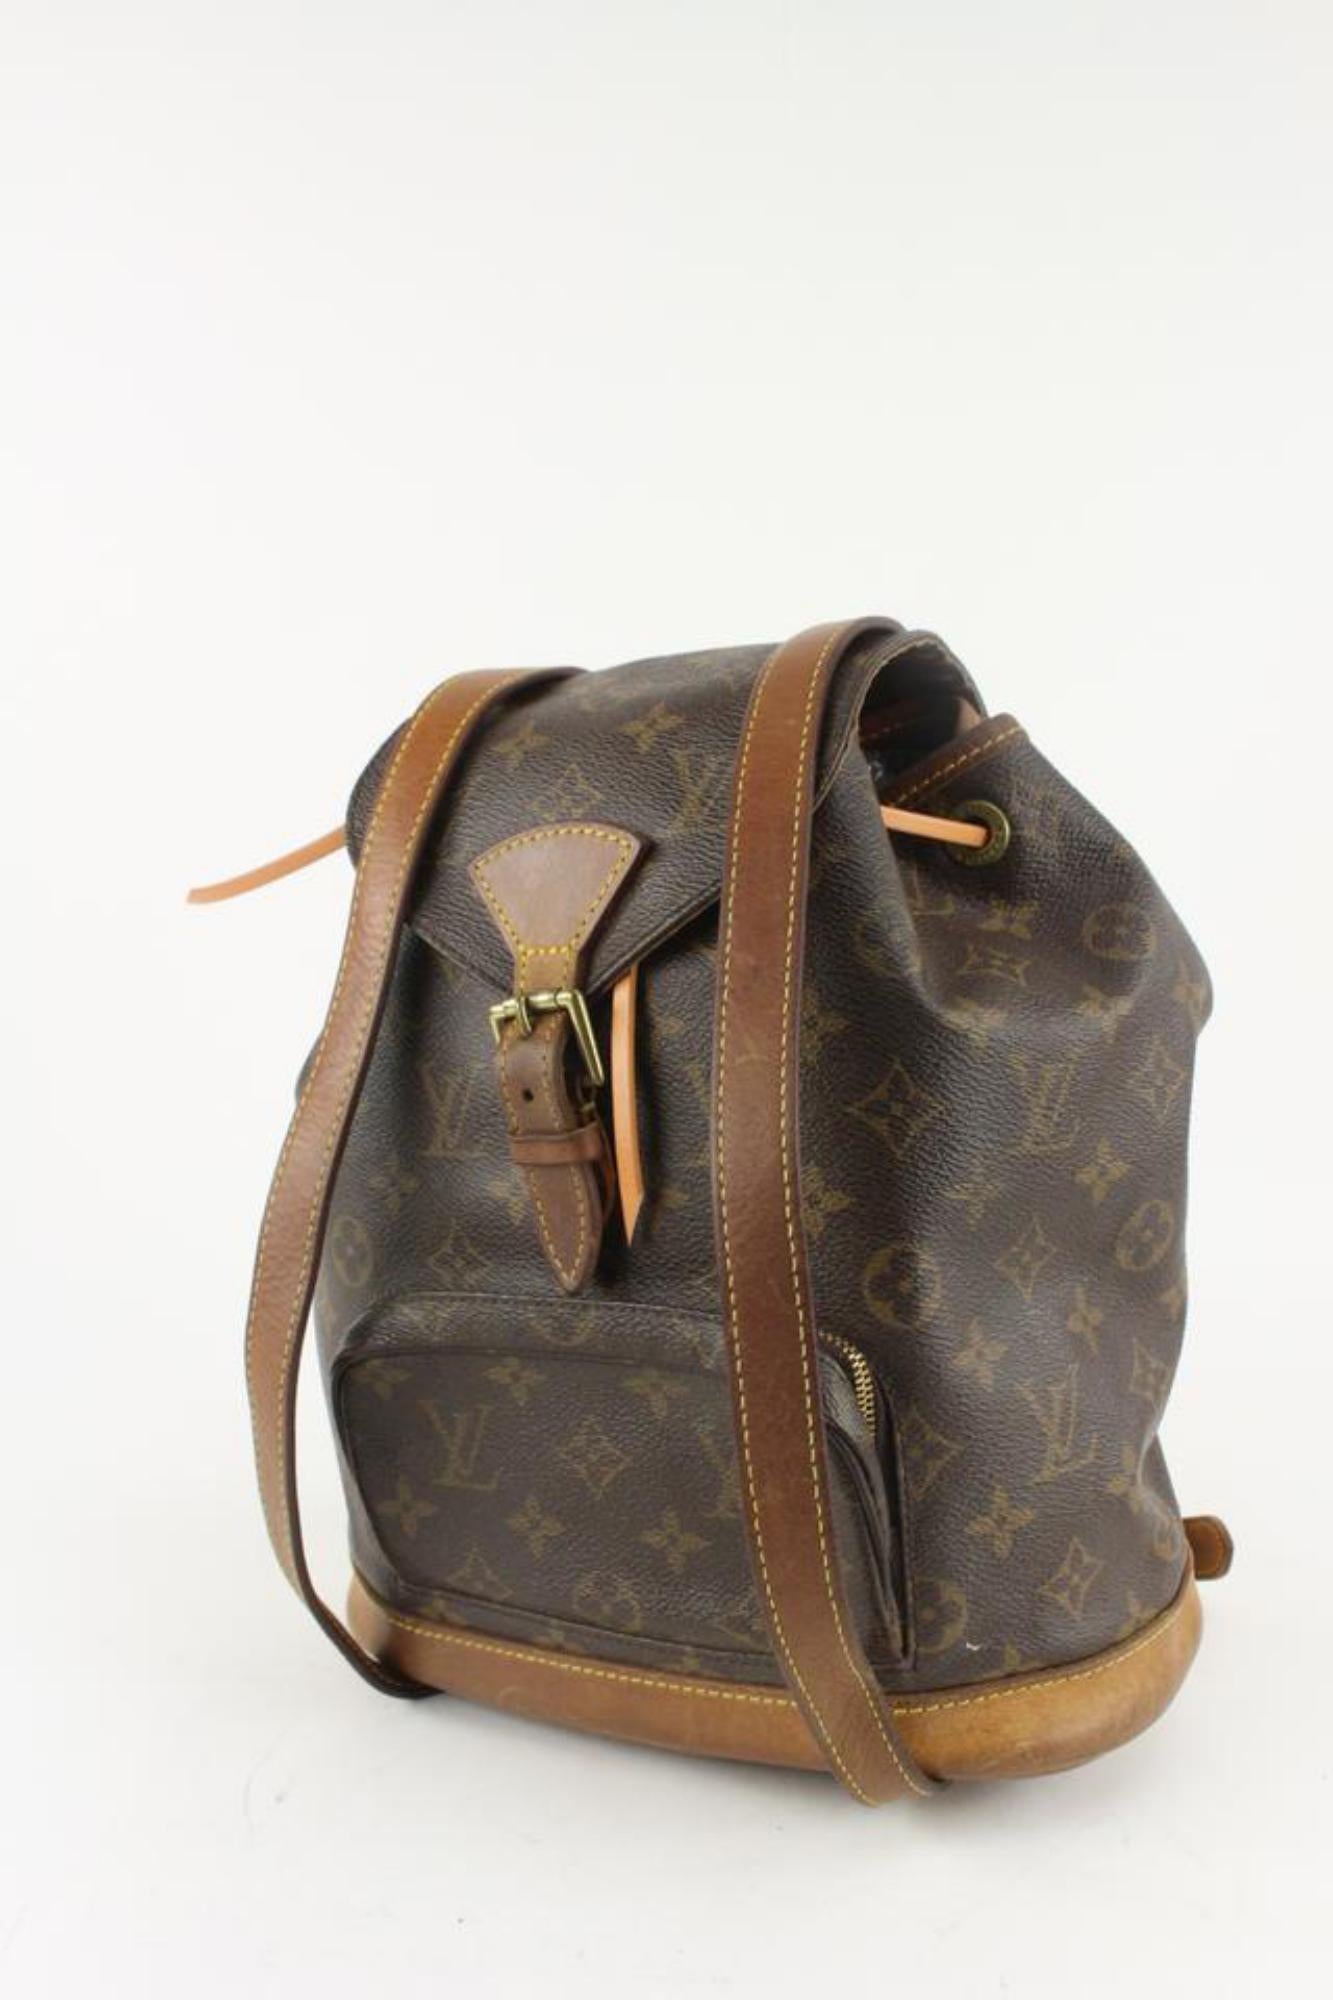 Louis Vuitton Monogram Montsouris MM Backpack 1216lv28
Date Code/Serial Number: SP0011
Made In: France
Measurements: Length:  13